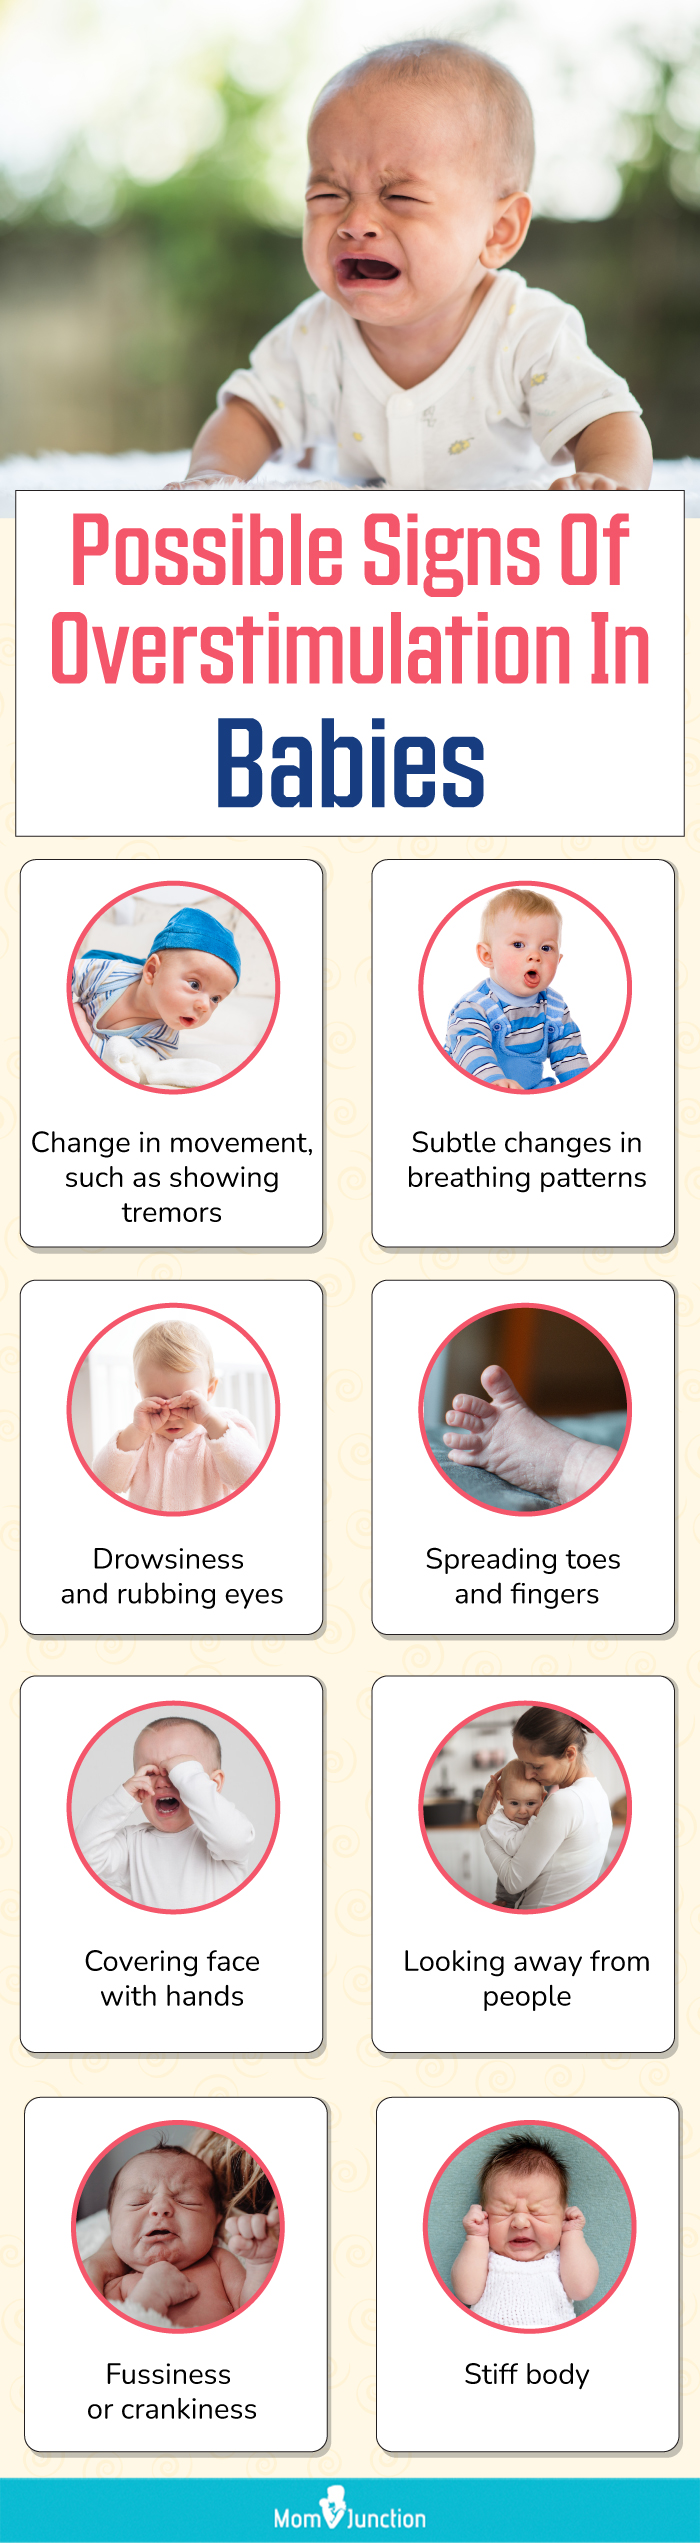 possible signs of overstimulation in babies (infographic)